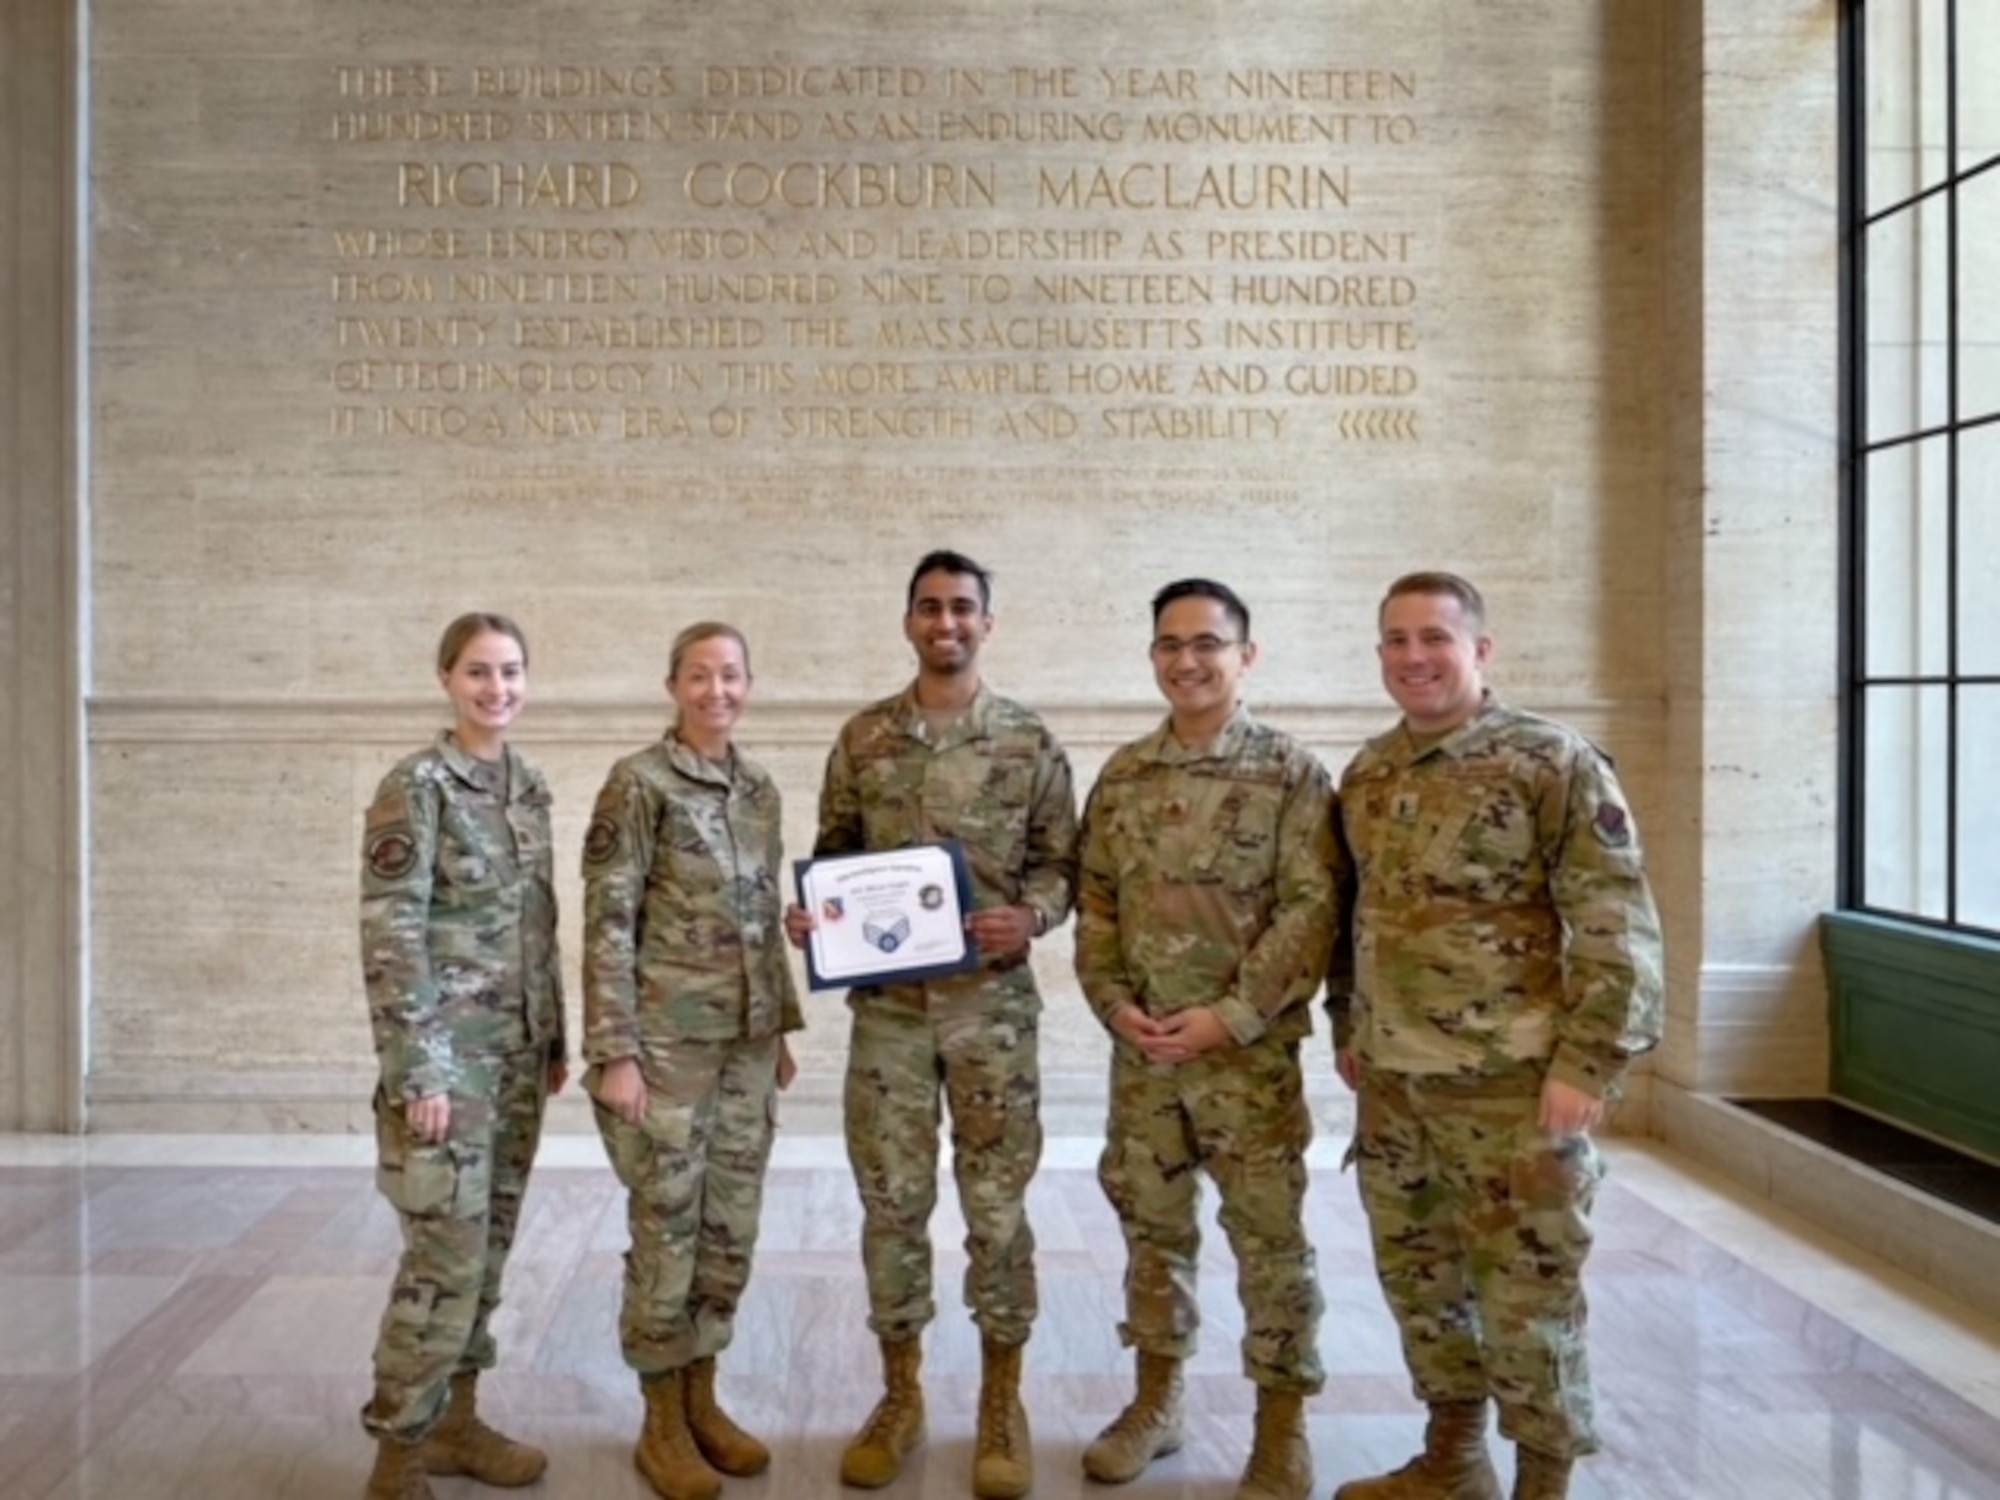 35th Intelligence Squadron leadership gathers together to celebrate Airman 1st Class Dhruv Gupta’s (center) promoting to Senior Airman during their visit to Massachusetts Institute of Technology, in Cambridge, Mass on May 27. Gupta will be promoting to SrA June 17, 2022.